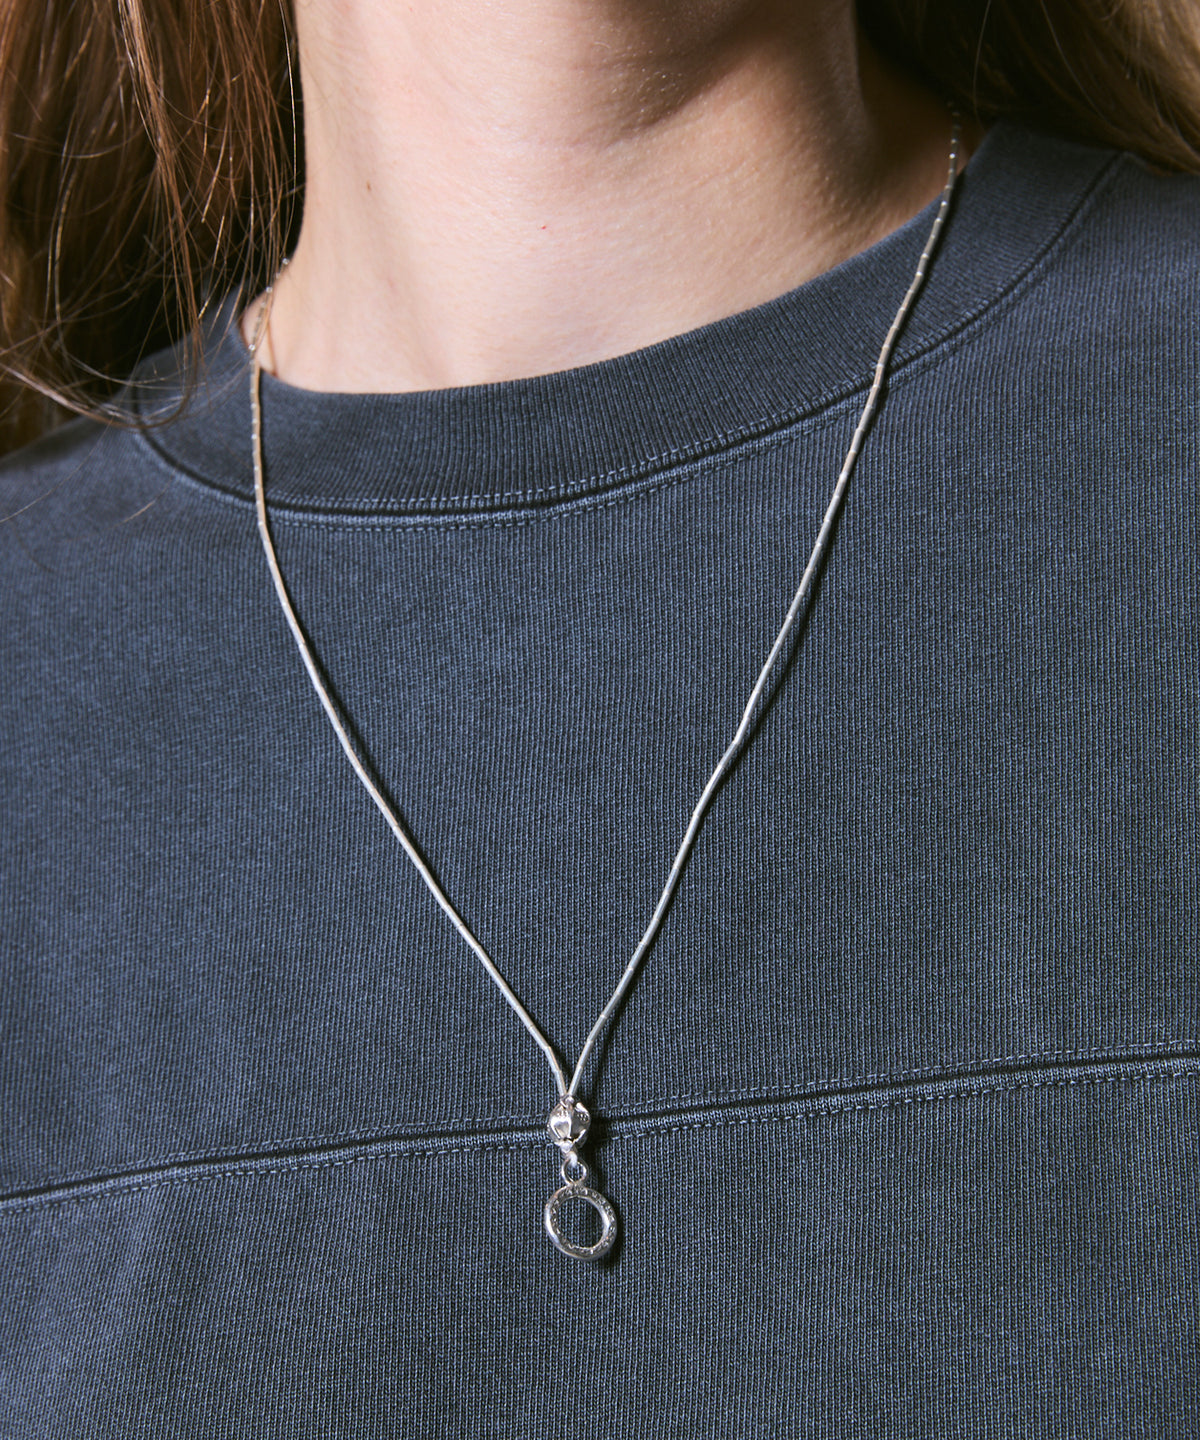 【Mountain People x MAISON SPECIAL】Necklace2